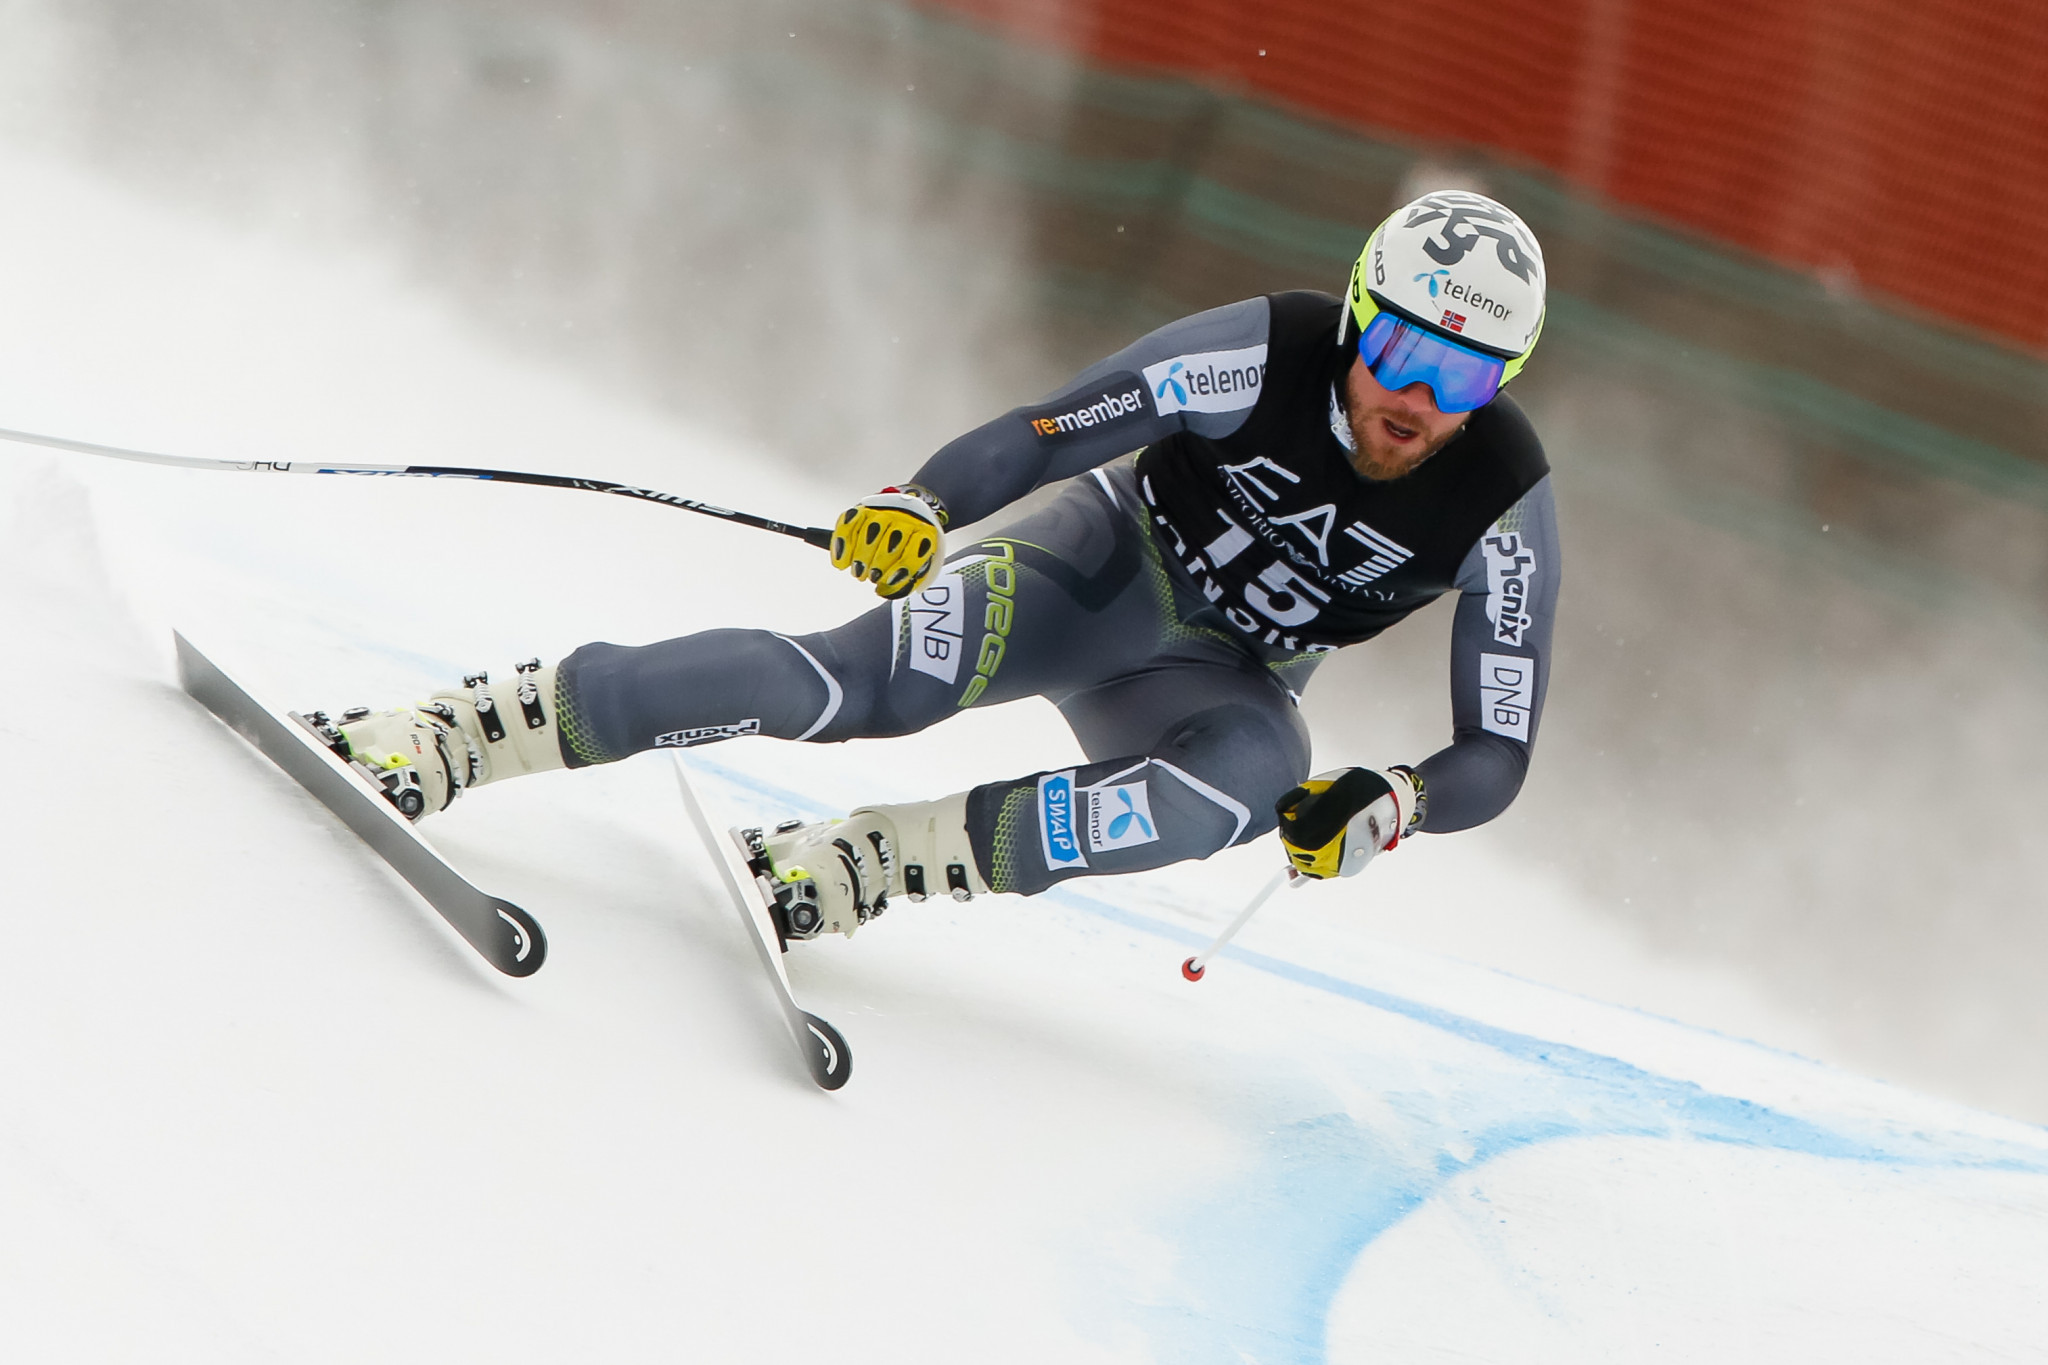 Jansrud clocks quickest run in training as World Cup downhill cancelled in Kvitfjell